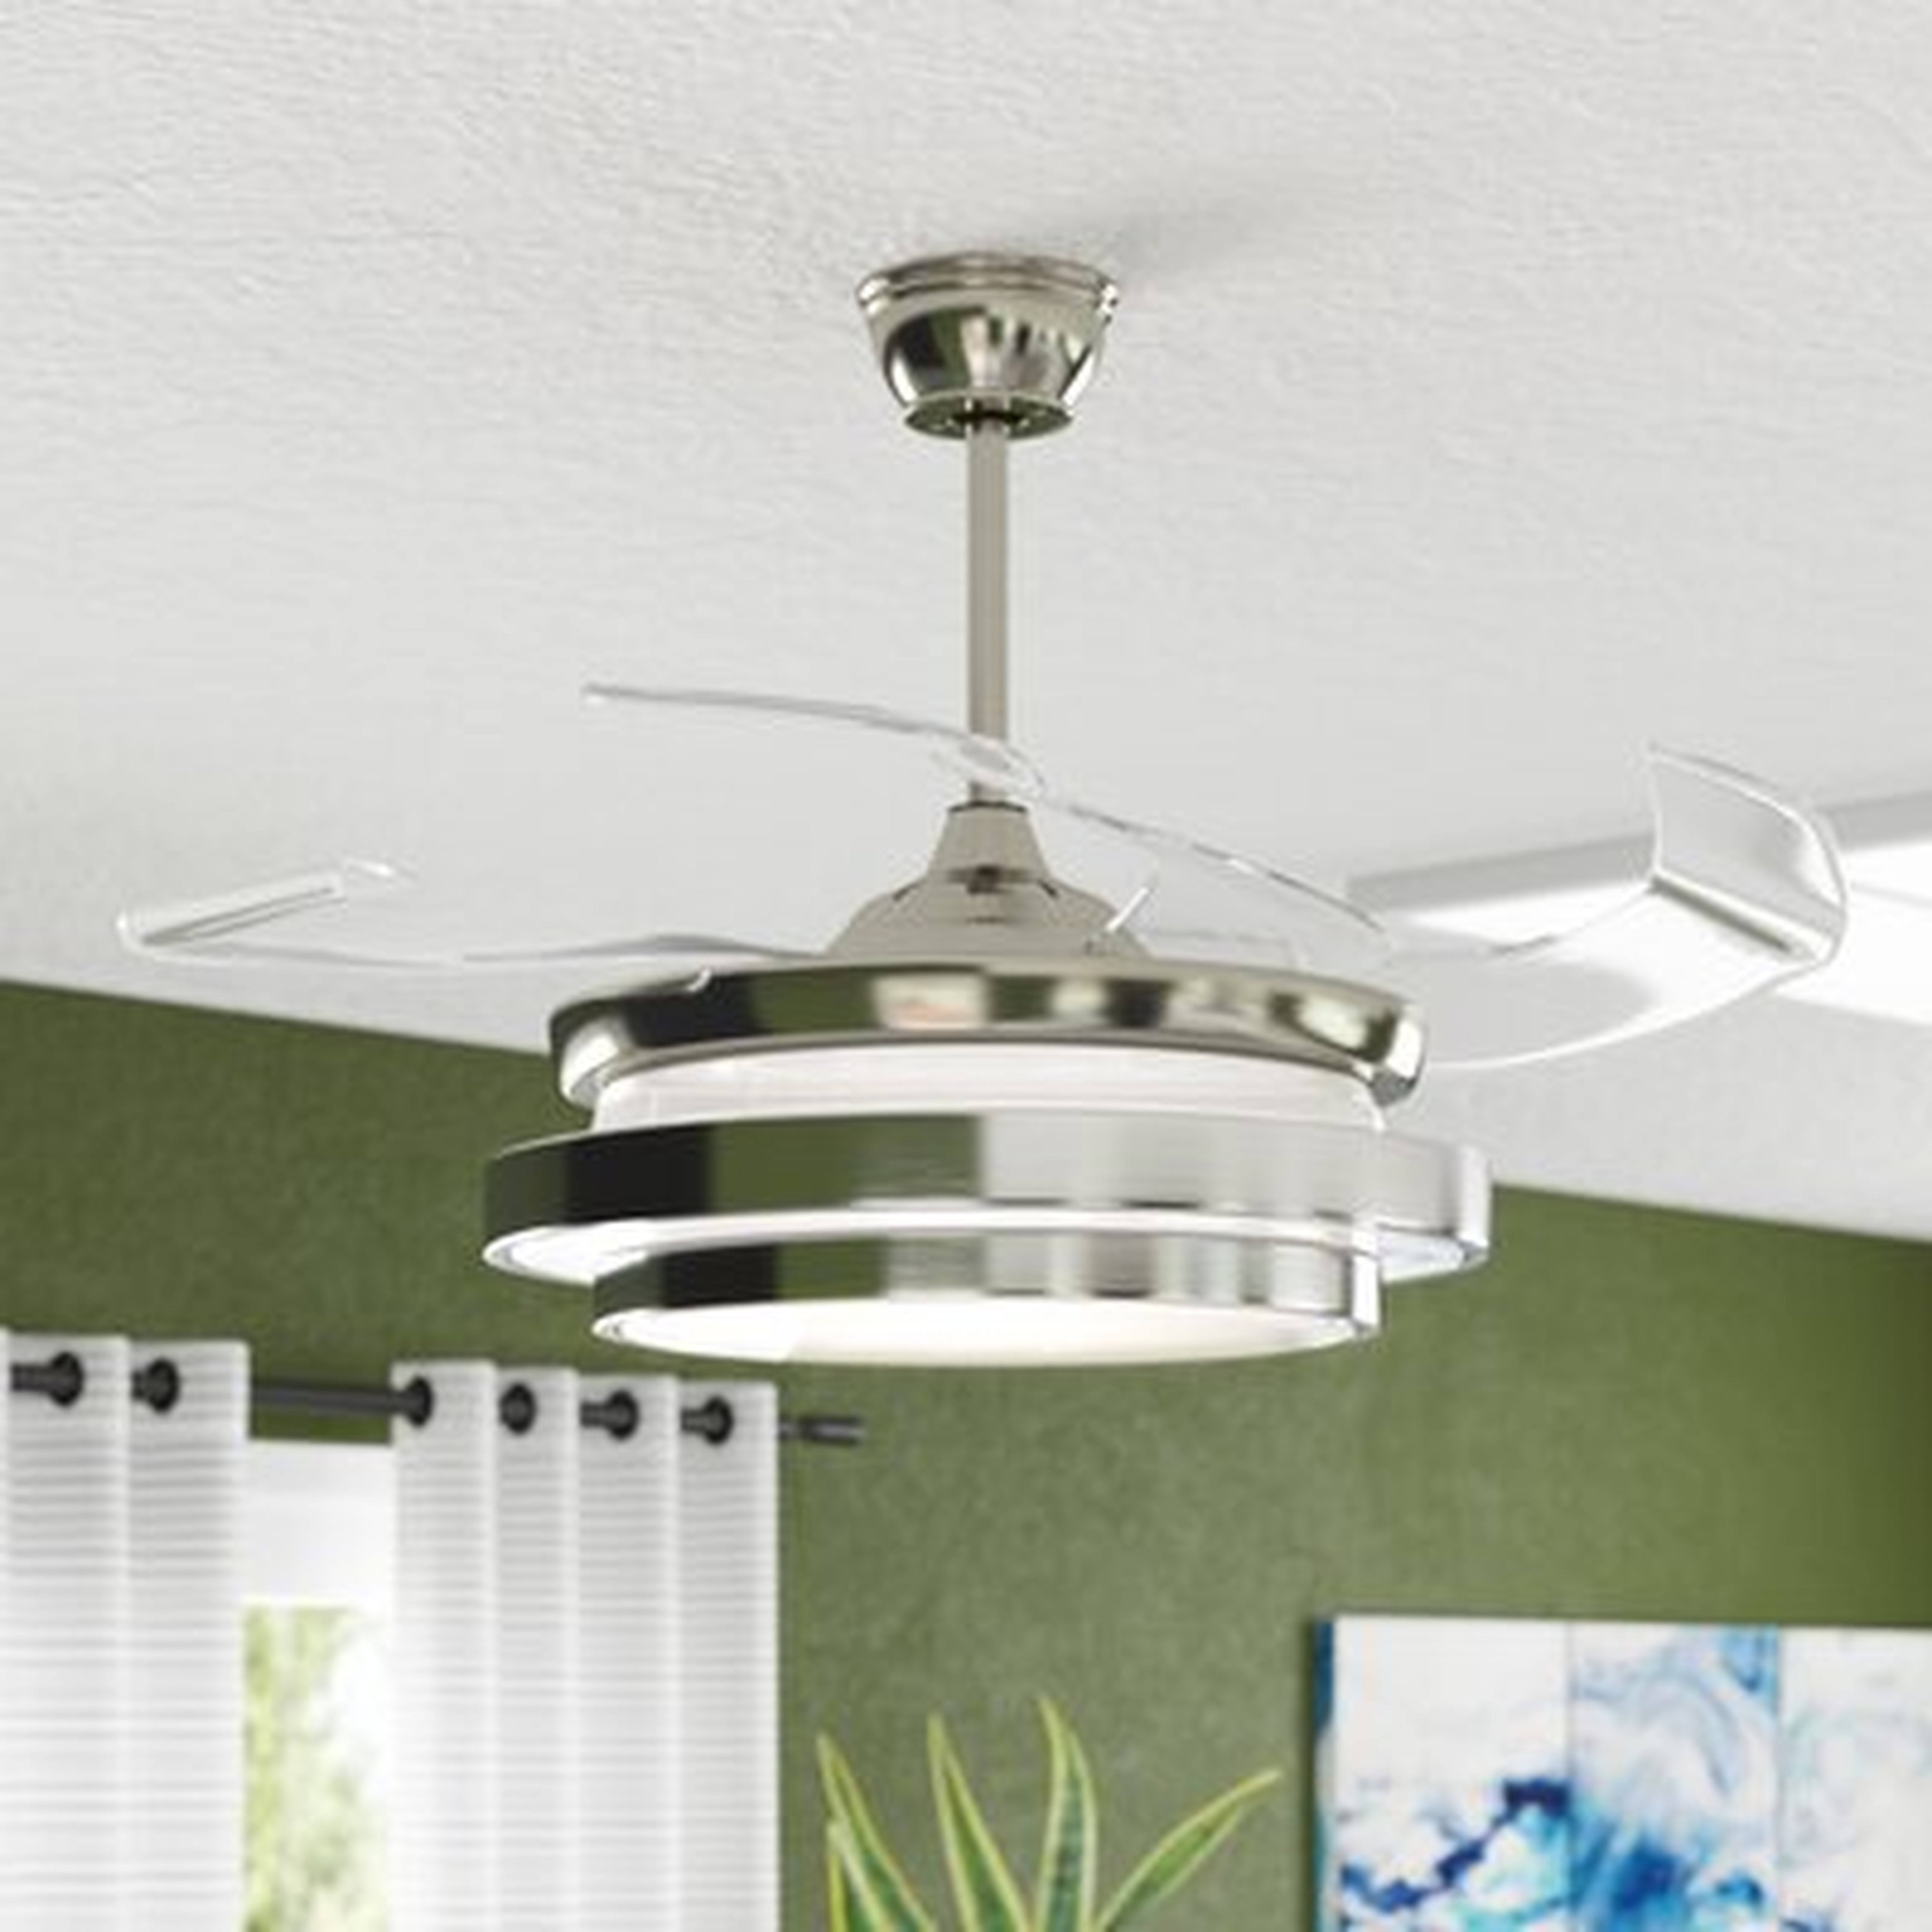 Aadvik 3 - Blade LED Ceiling Fan with Remote Control and Light Kit Included - Wayfair